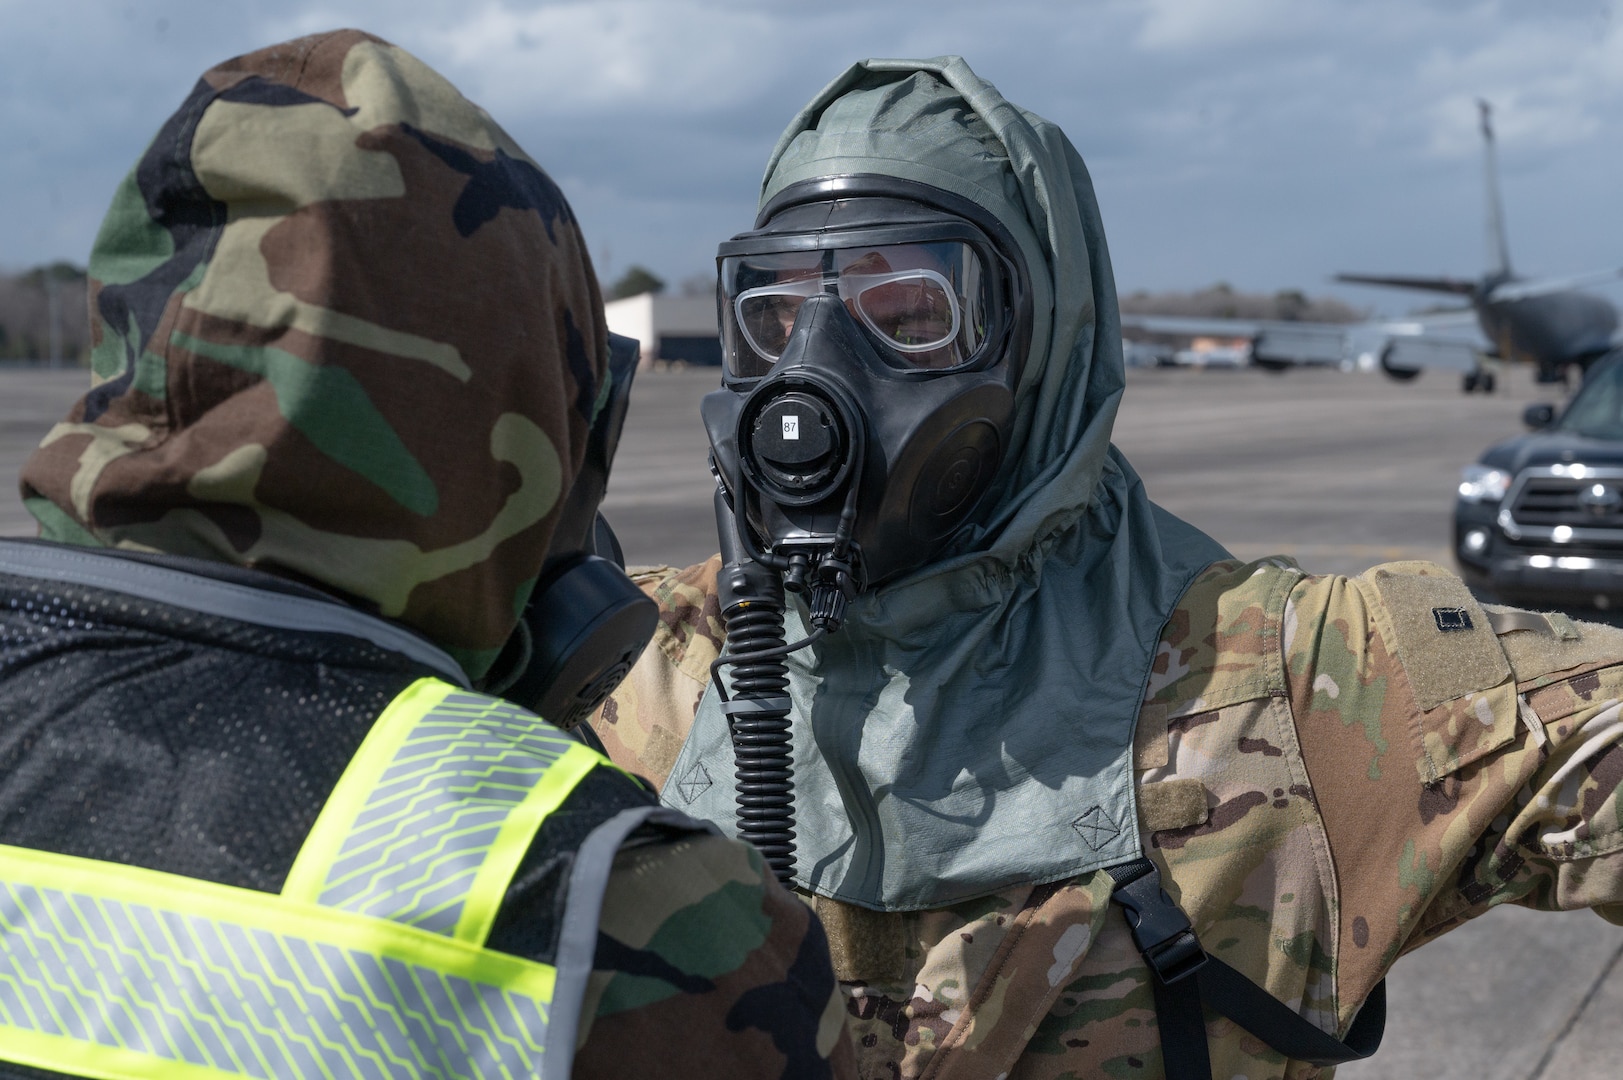 U.S. Air Force 1st Lt. Chase Bridges, a pilot, goes through the first station of the aircrew contamination control area to safely remove contaminated gear at Hunter Army Airfield, Georgia, Feb. 9, 2023. The 126th Operations Group, Illinois Air National Guard, forward-deployed a Total Force team to Georgia for Agile Combat Employment training.